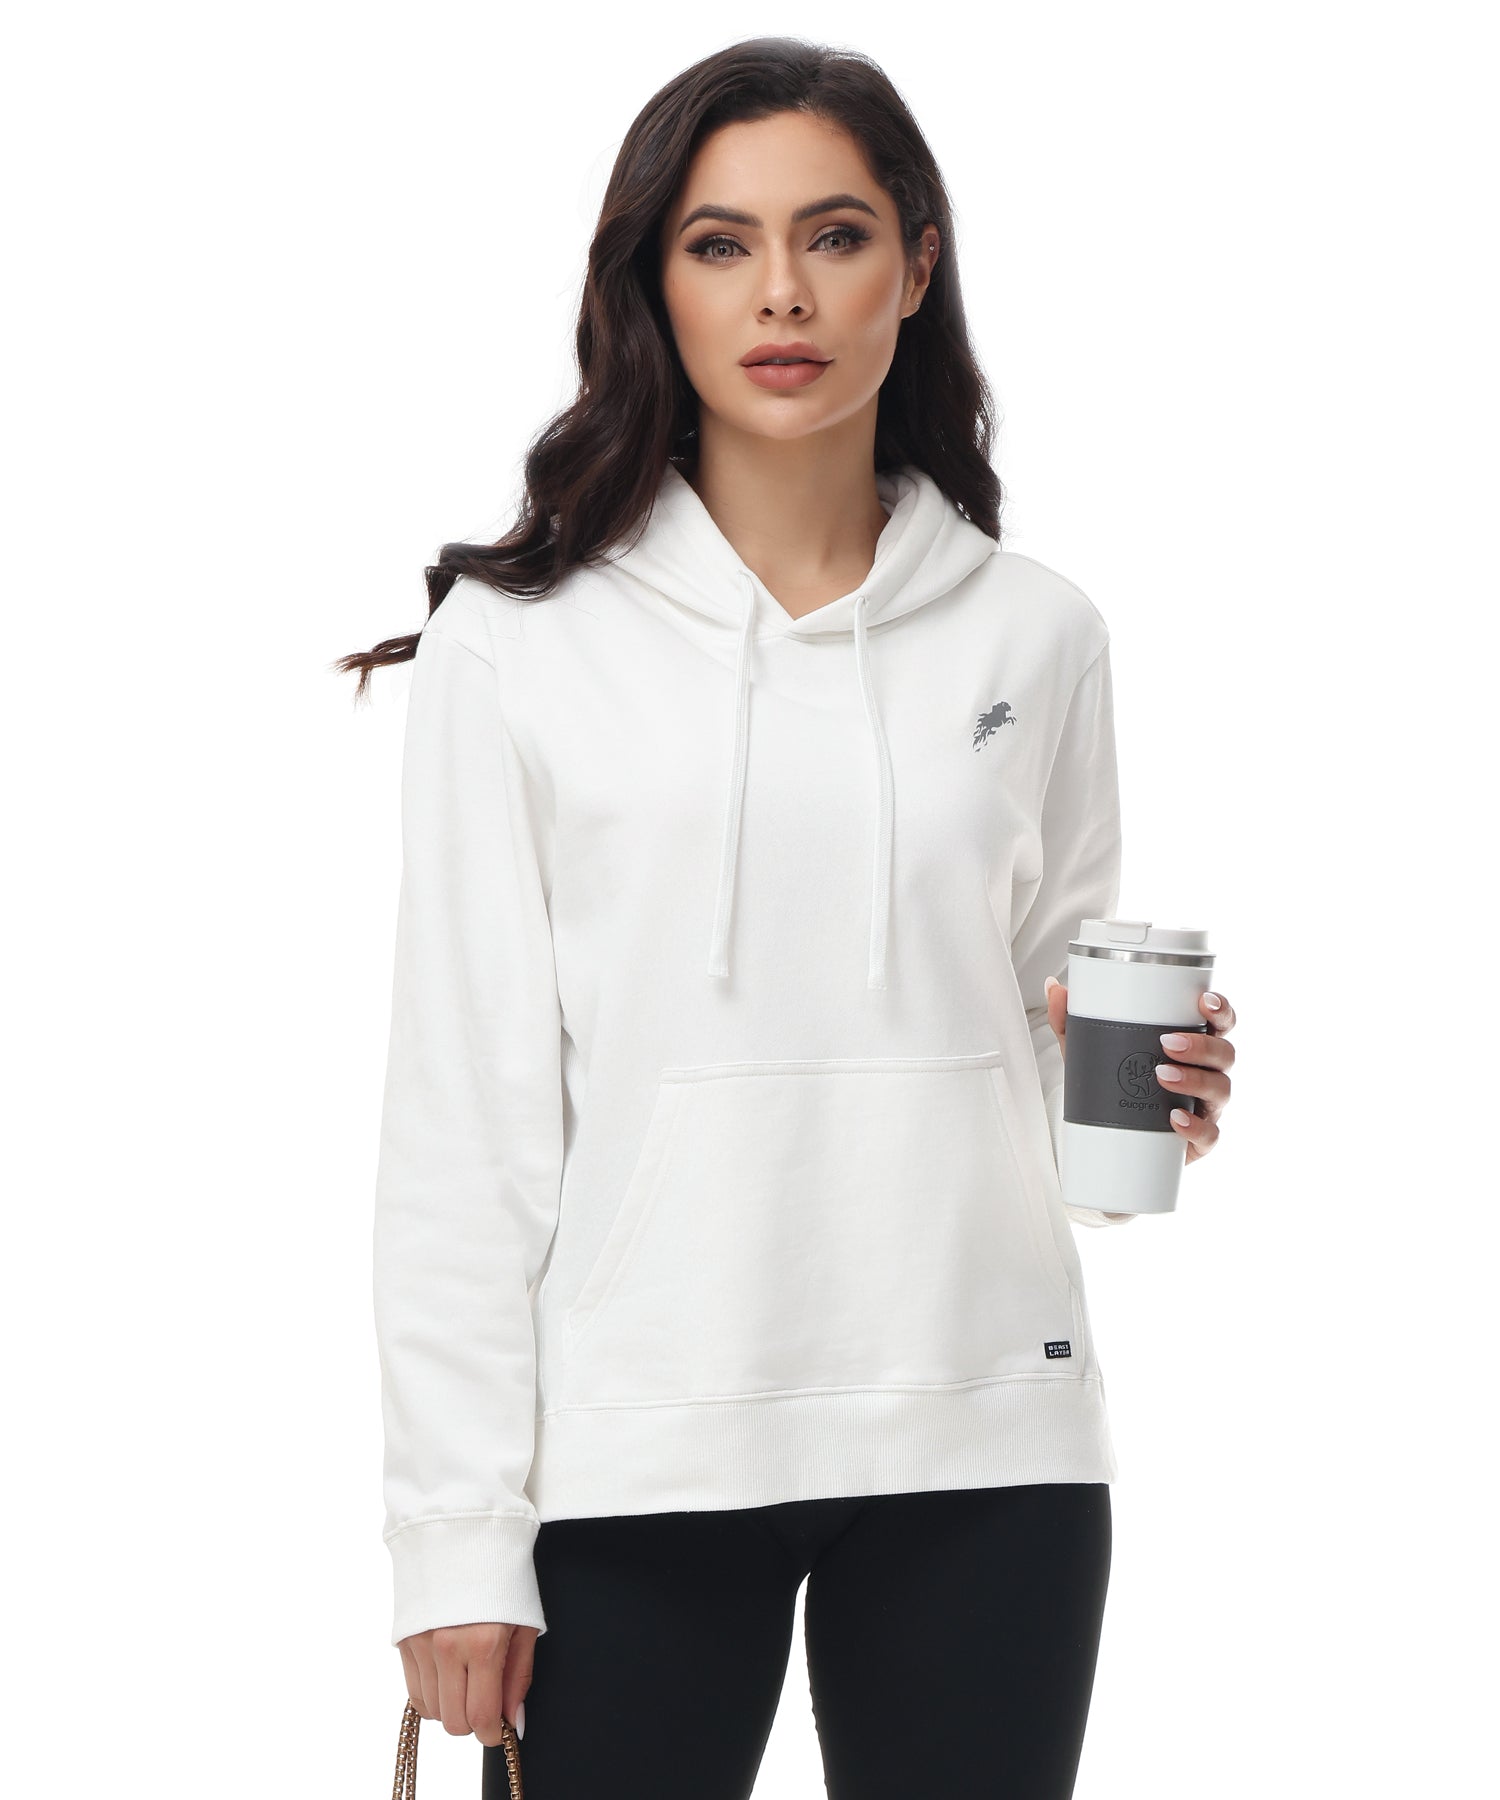 Sports Pullover Casual Sweatshirt With Pouch Pocket-Unisex